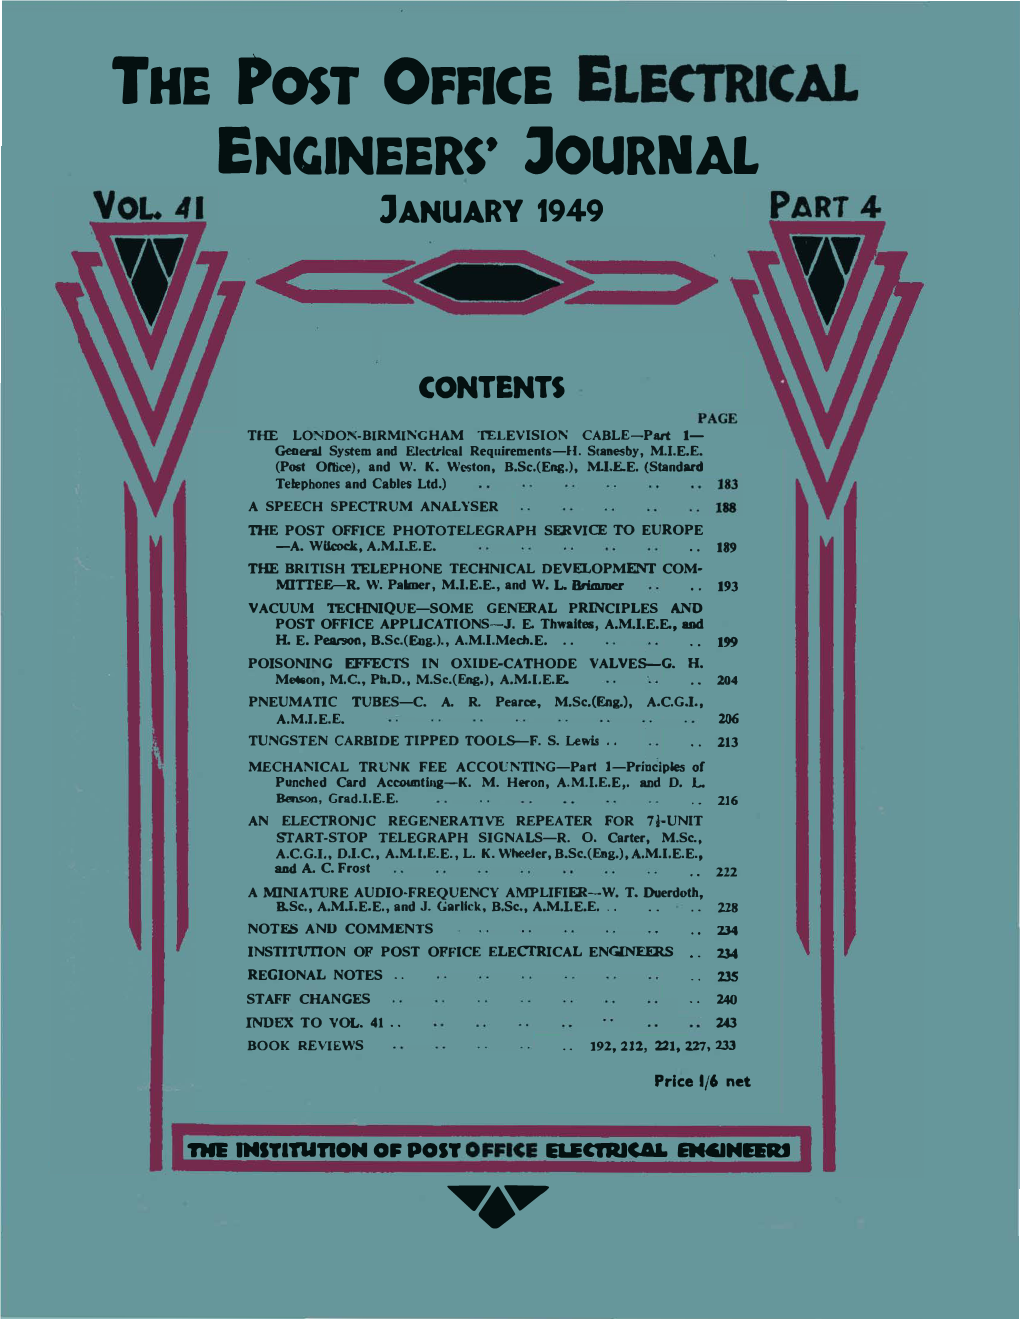 Post Office Electrical Engineers' Journal Vol41 Pt 4 January 1949